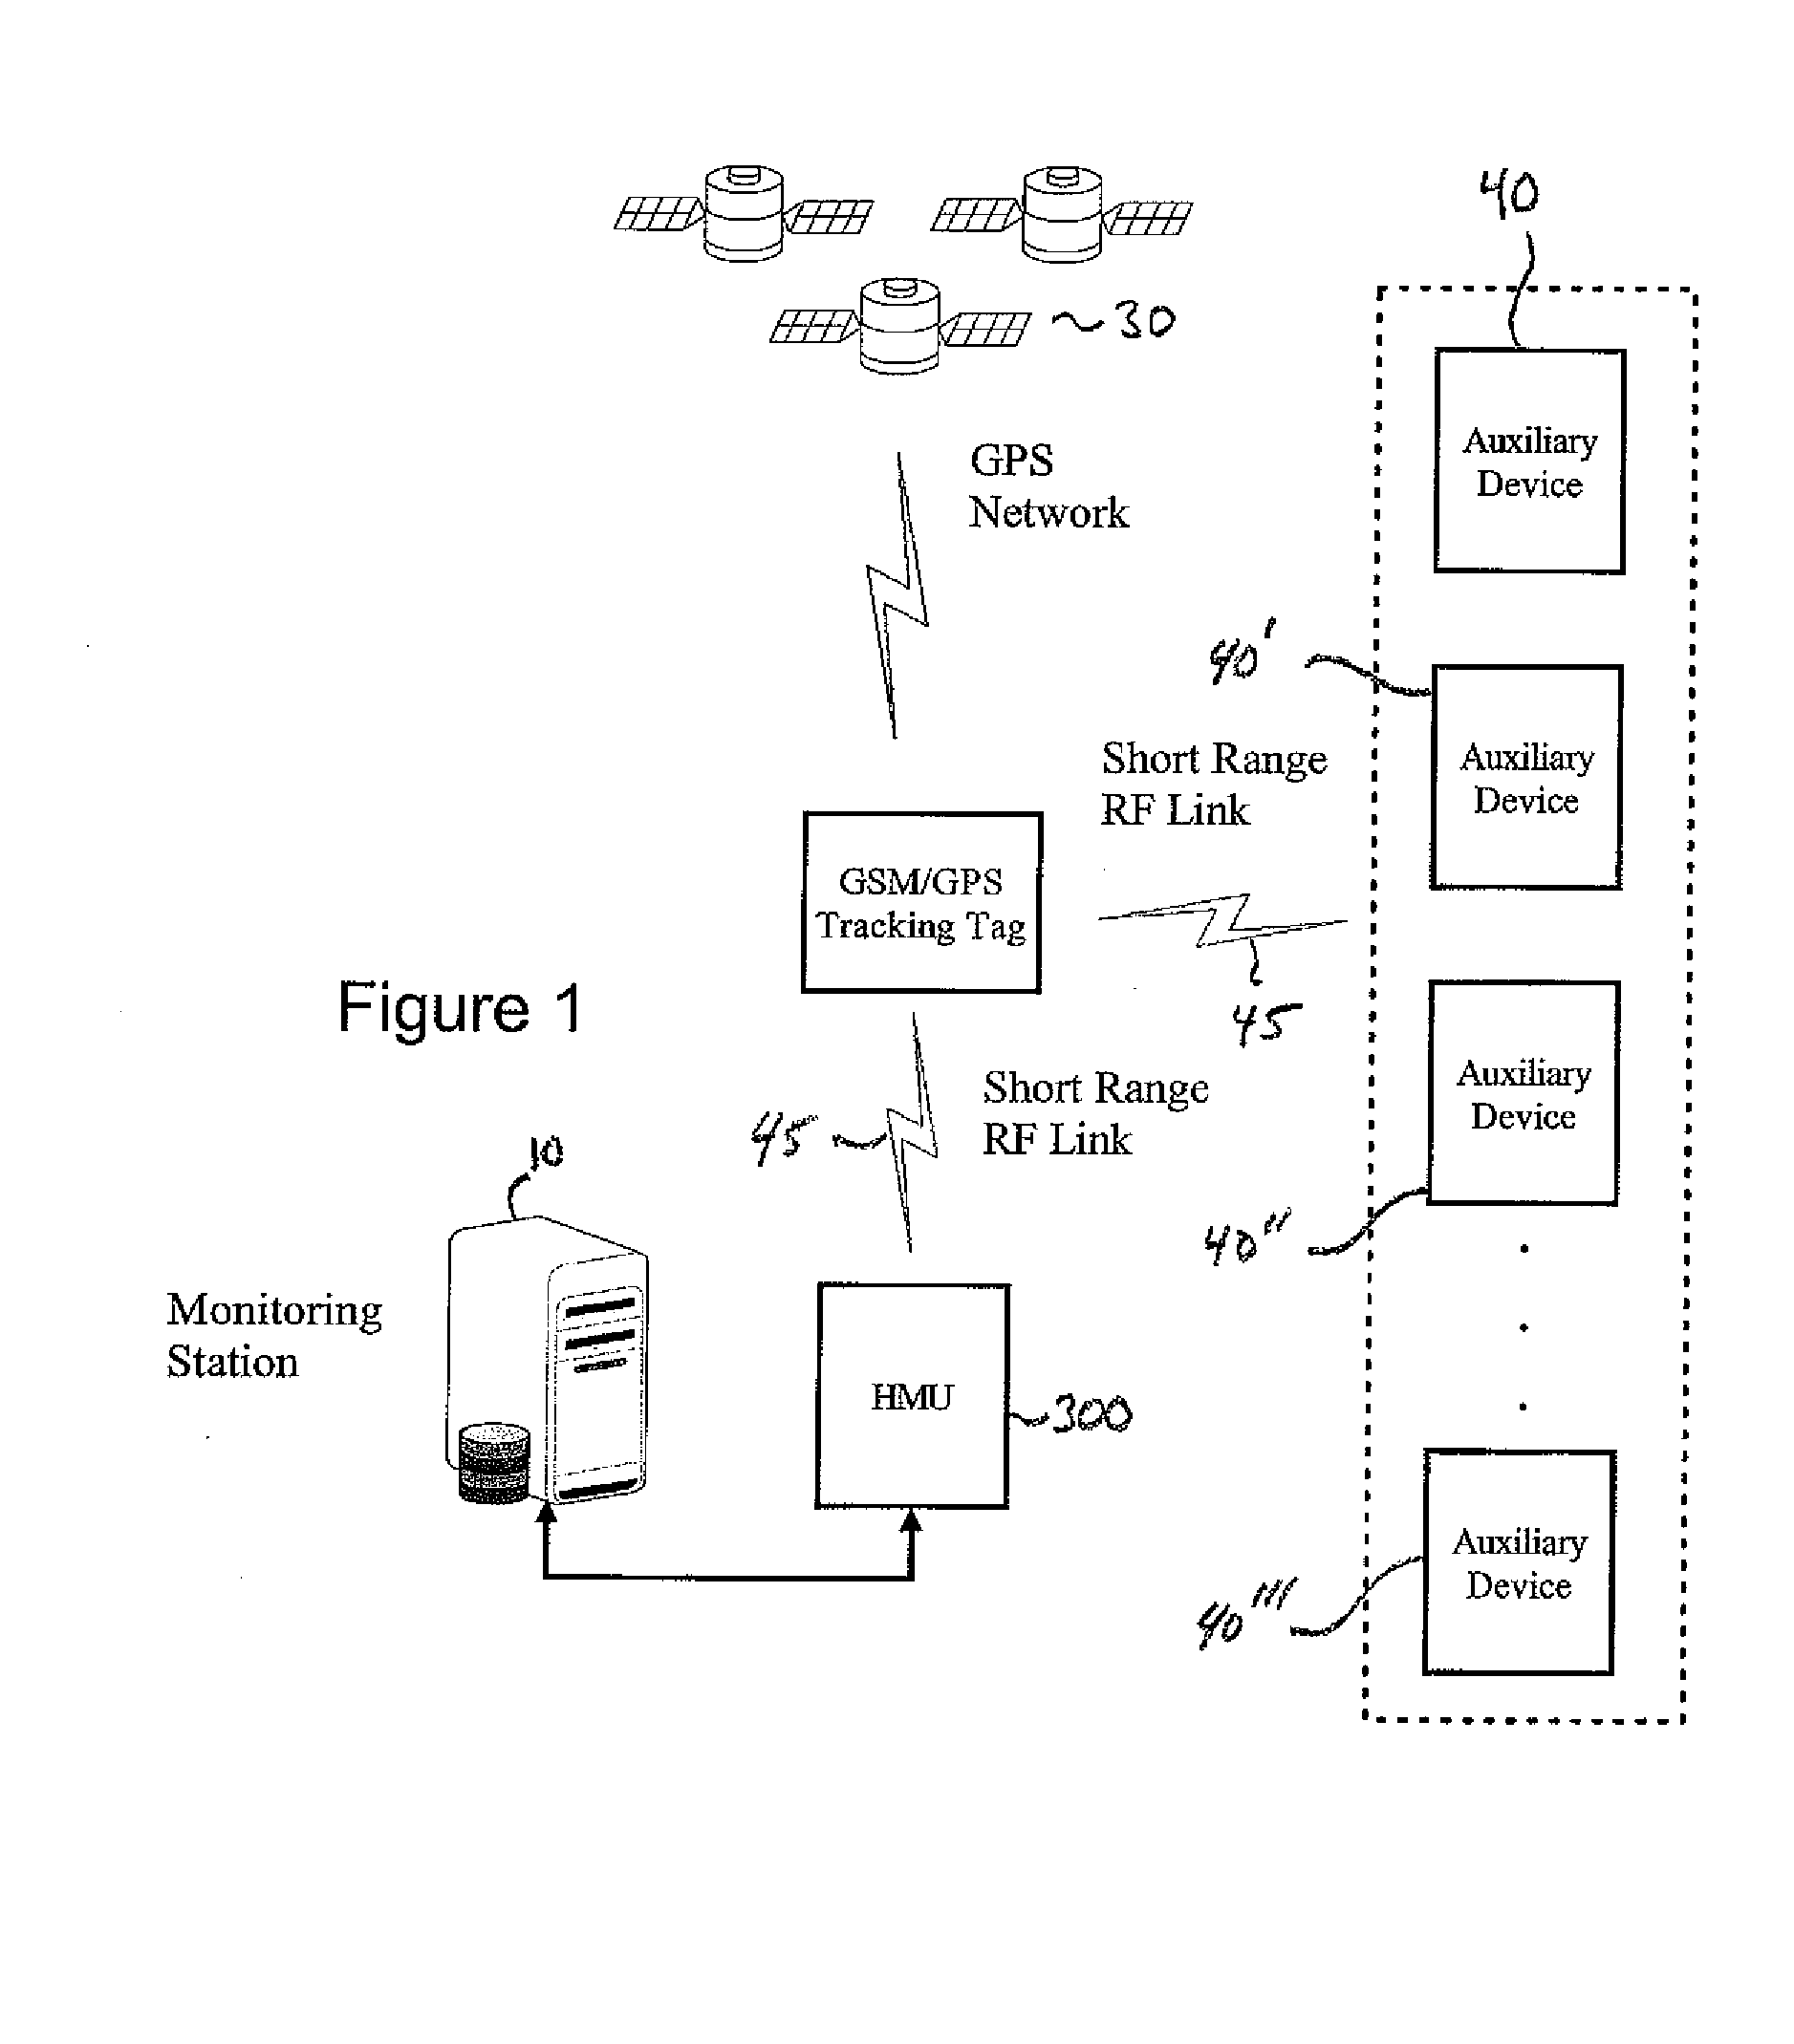 Active Wireless Tag And Auxiliary Device For Use With Monitoring Center For Tracking Individuals or Objects